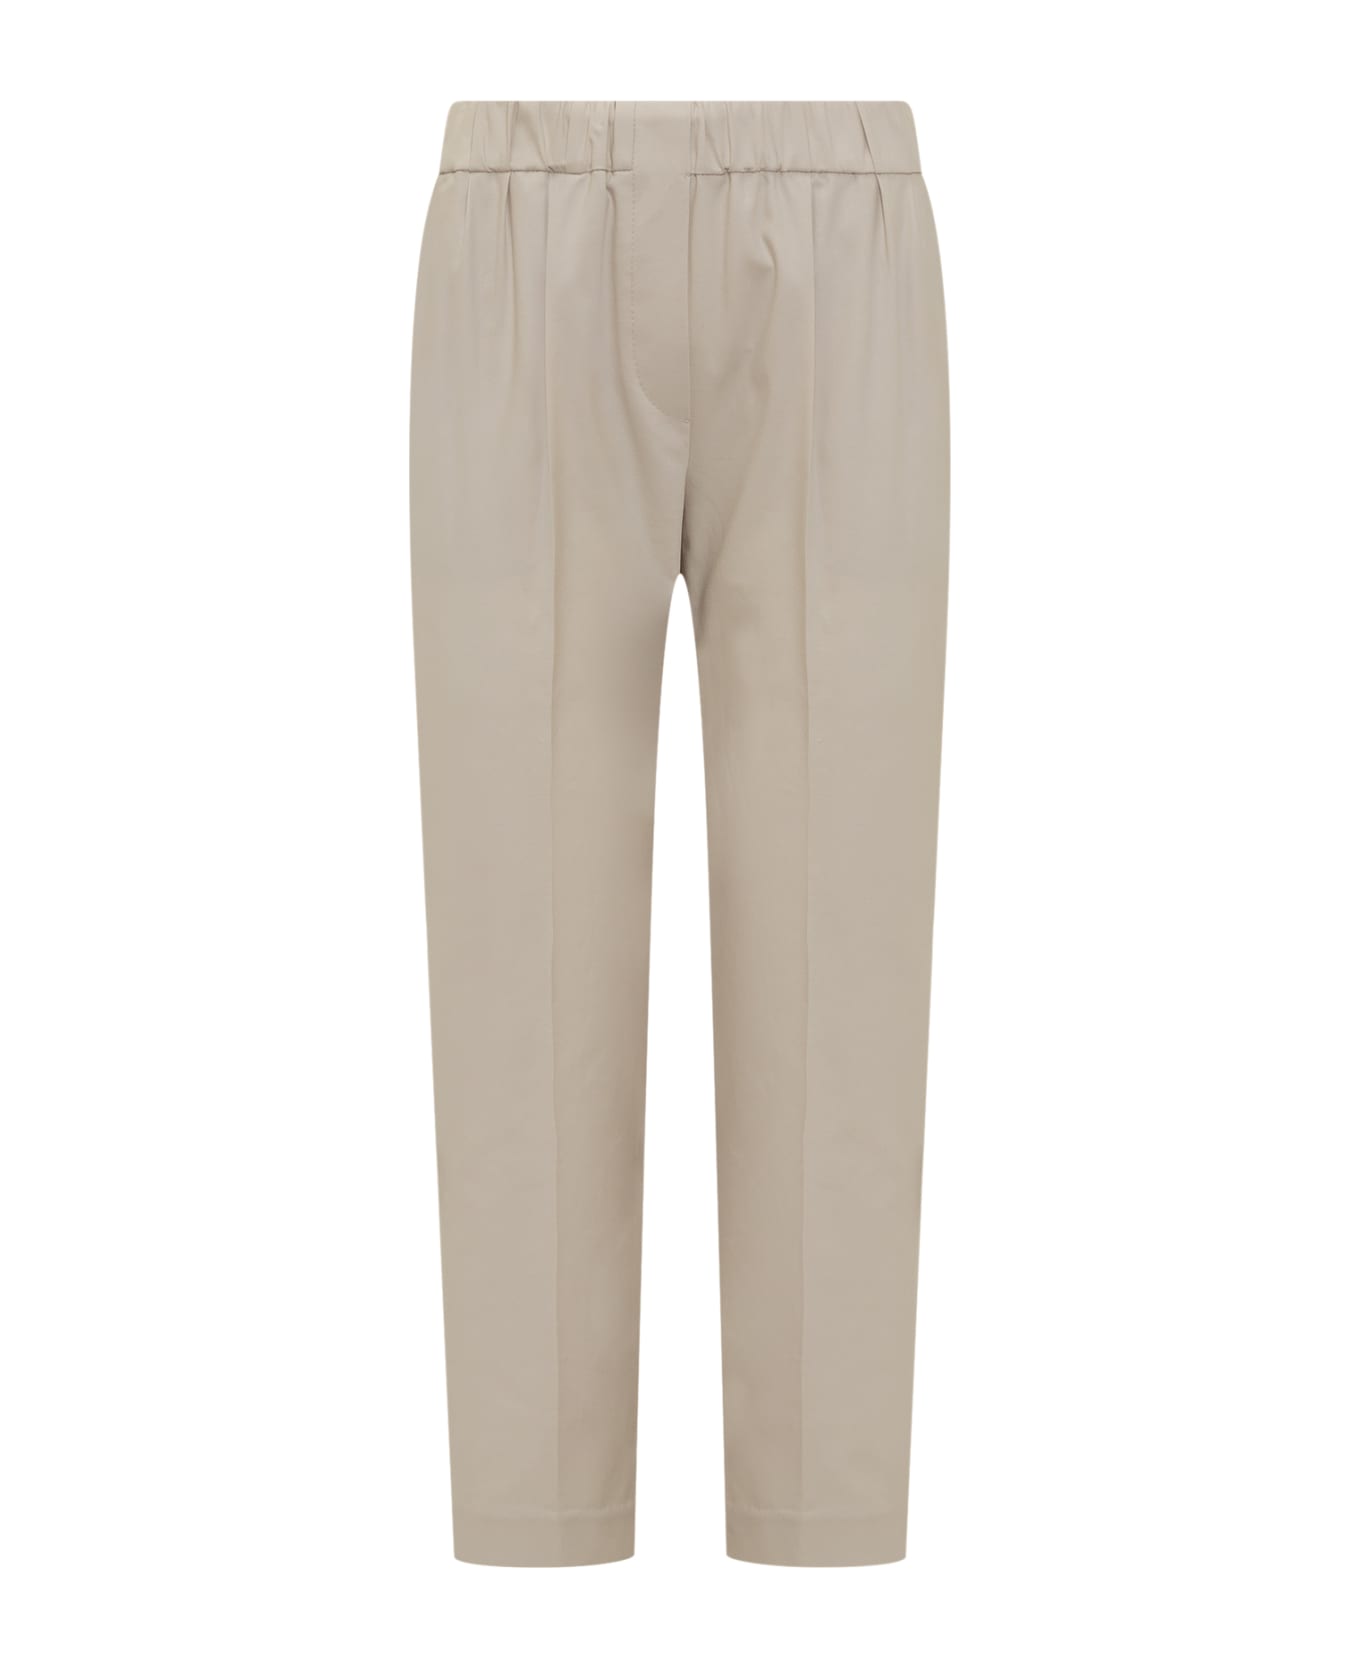 Brunello Cucinelli Stretch Cotton Trousers With Elastic Waistband And Small Pleats On The Front - AVENA